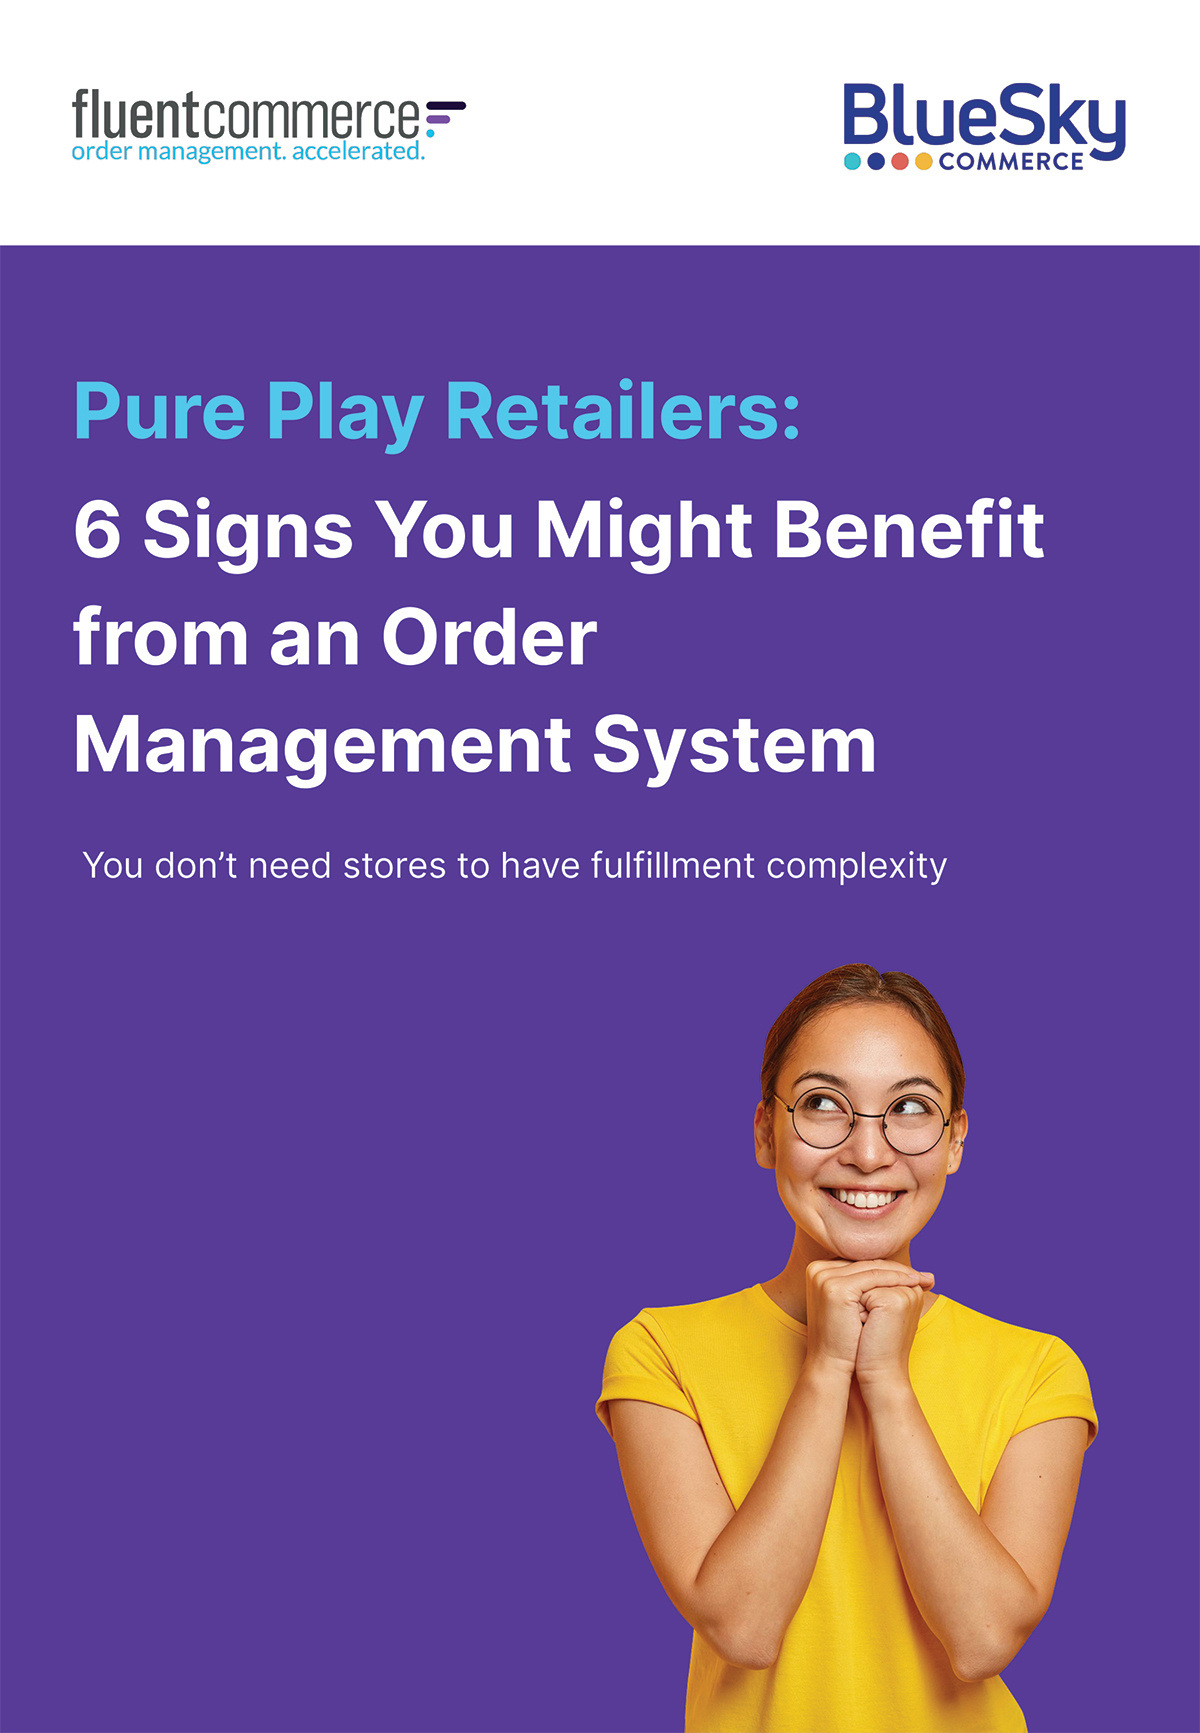 Pure play retailers: 6 signs you might benefit from an order management system